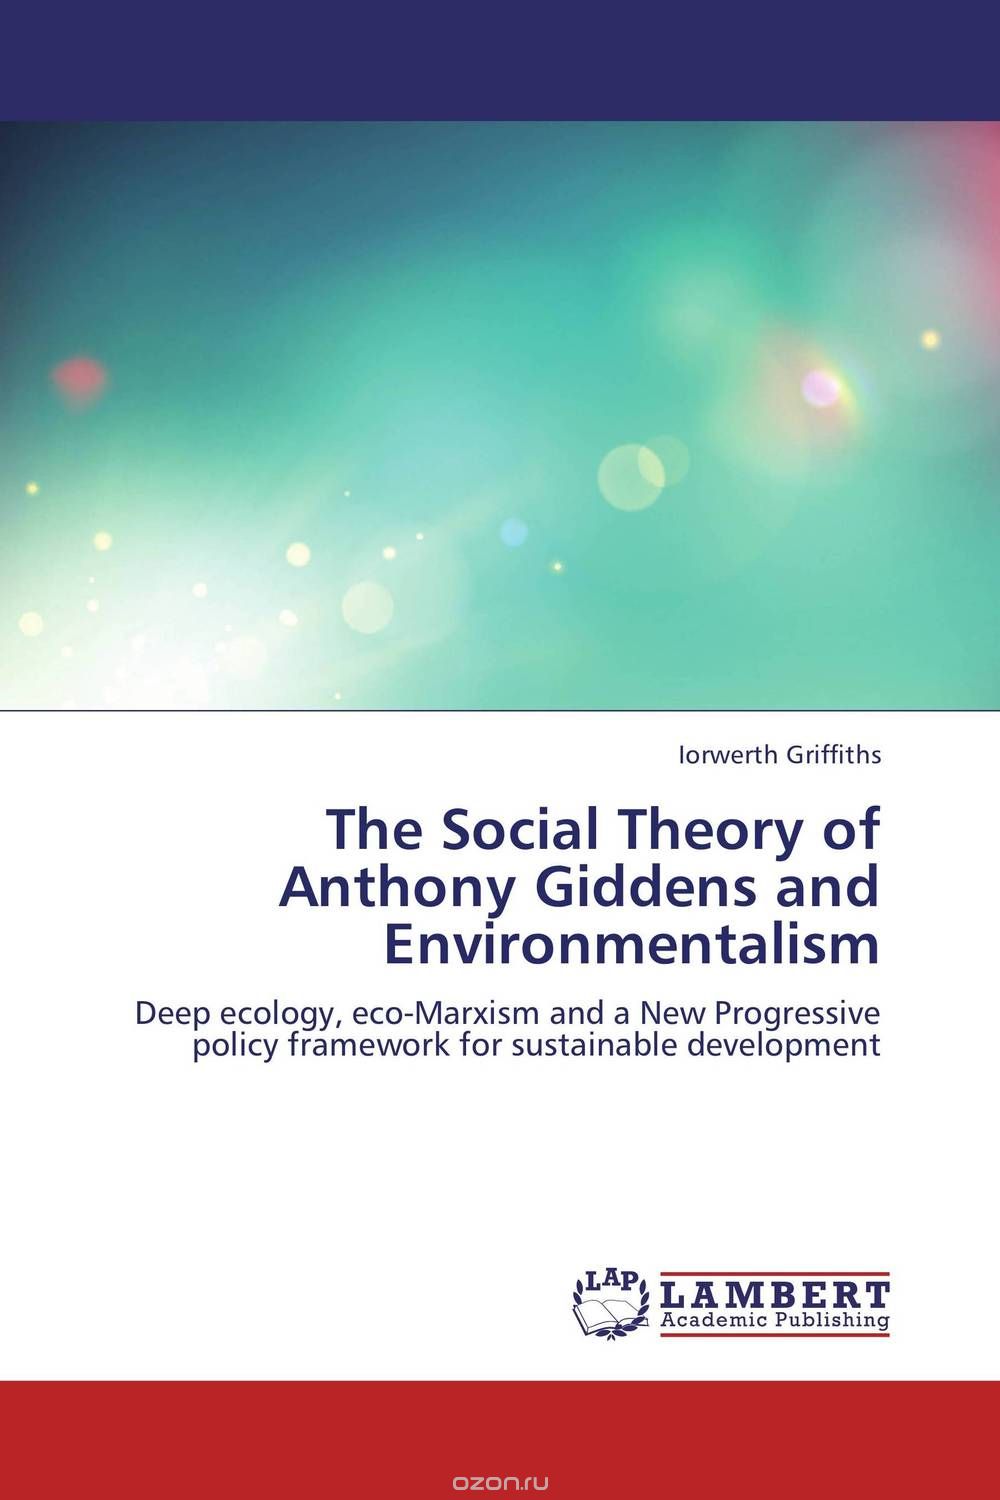 The Social Theory of Anthony Giddens and Environmentalism